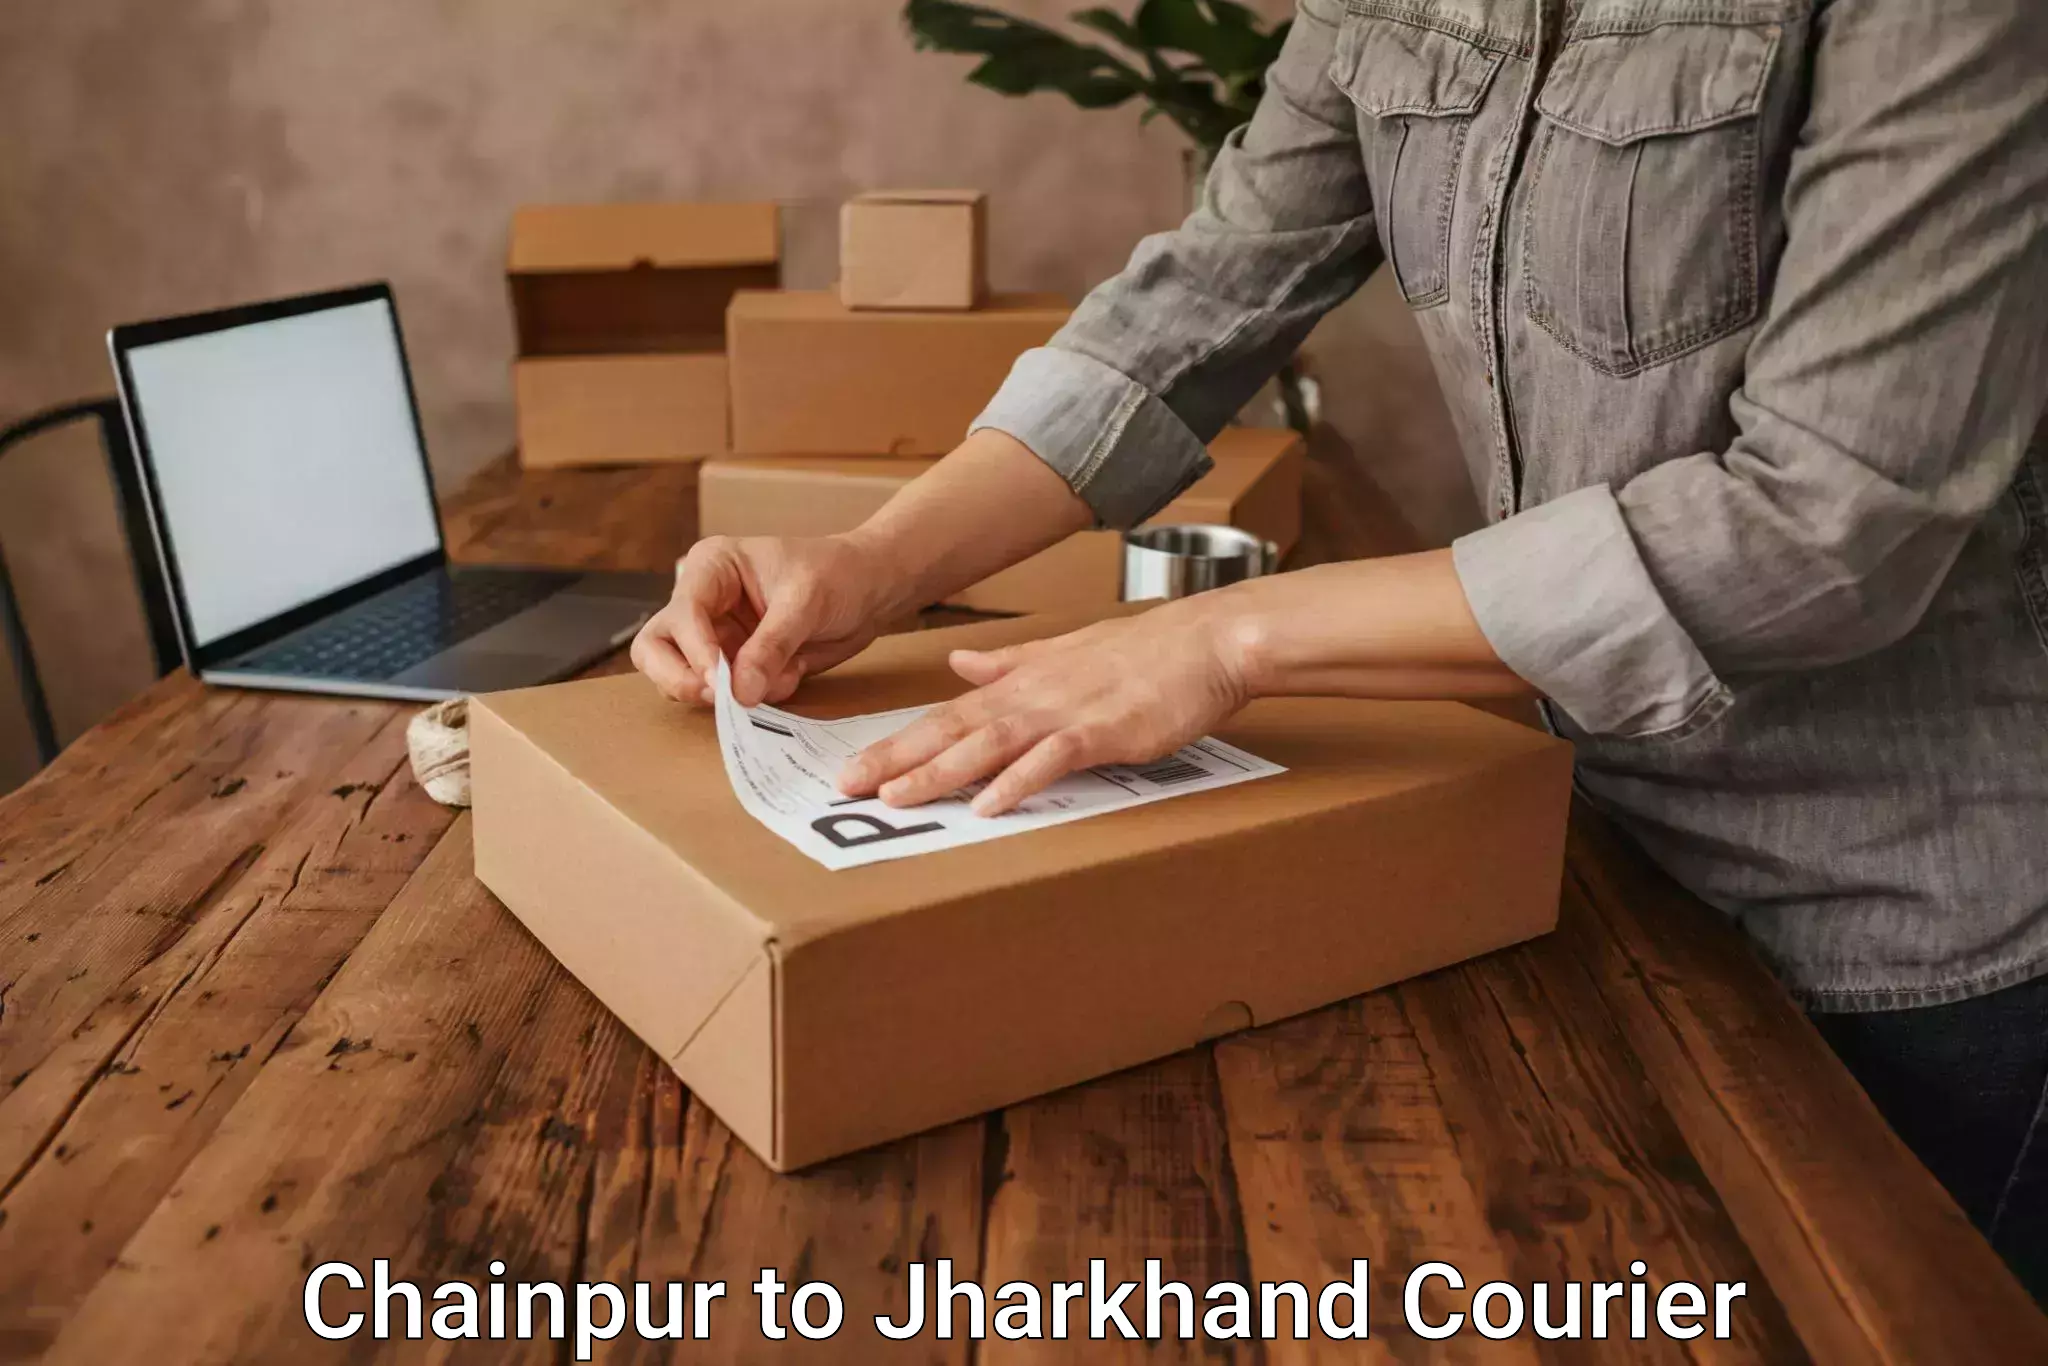 Furniture delivery service Chainpur to Satbarwa